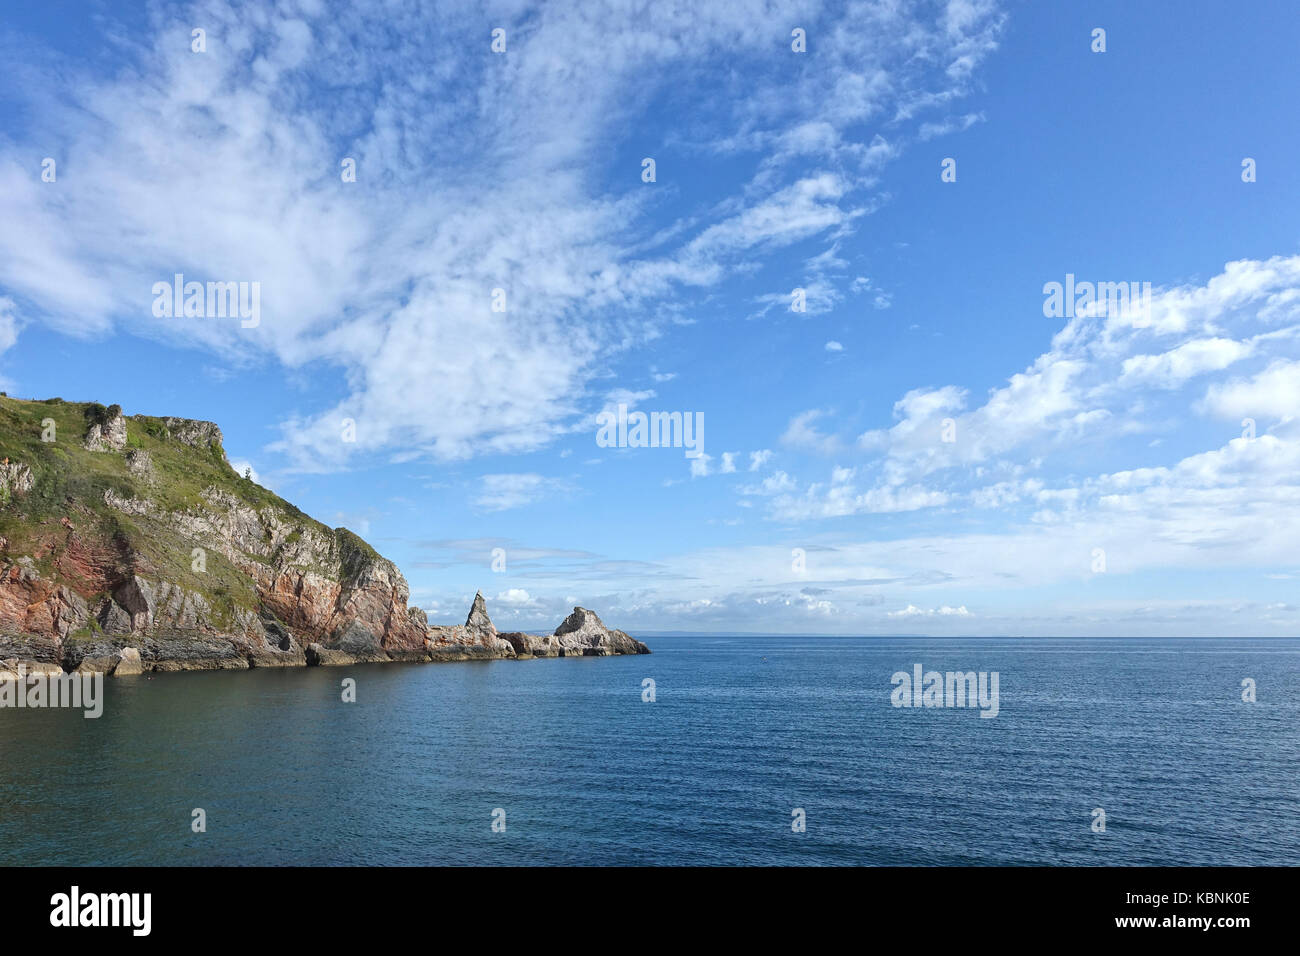 The unusual rock formation on the east side of Anstey's Cove, Torquay, Devon, UK on a beautiful sunny summer's morning. Stock Photo